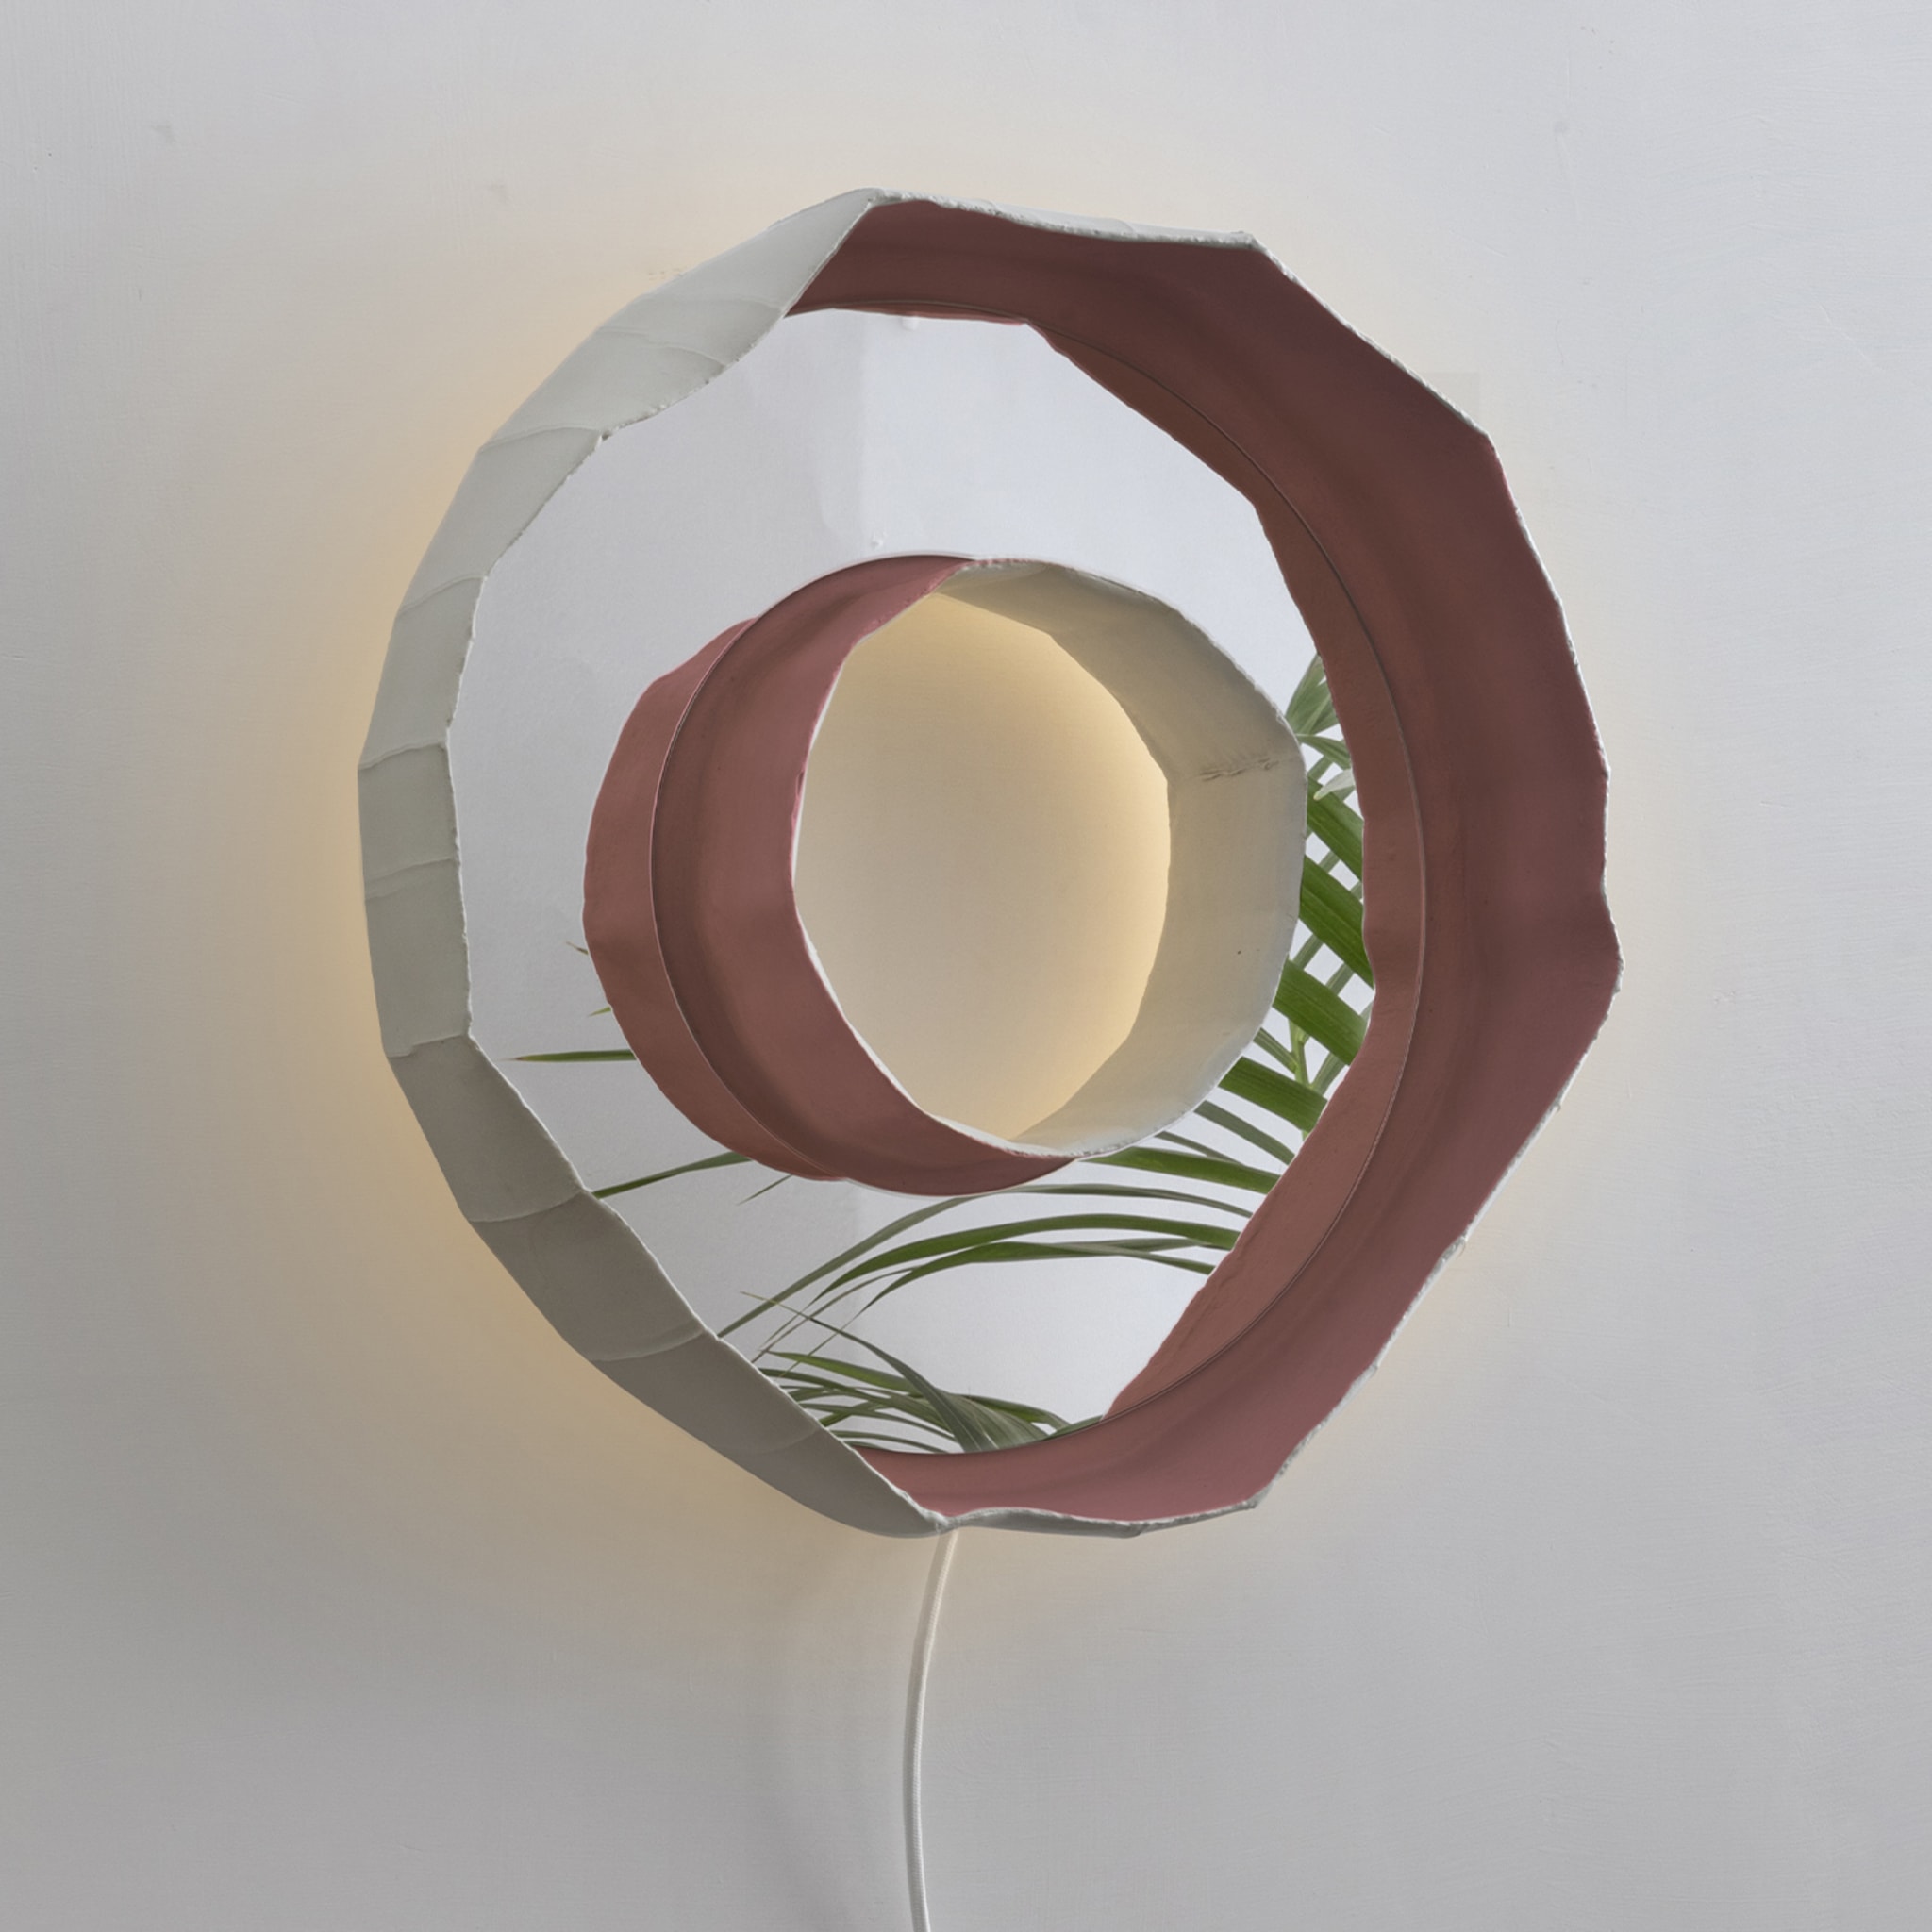 White Ring Aura Lamp With Cable By G. Botticelli & P. Paronetto - Alternative view 1